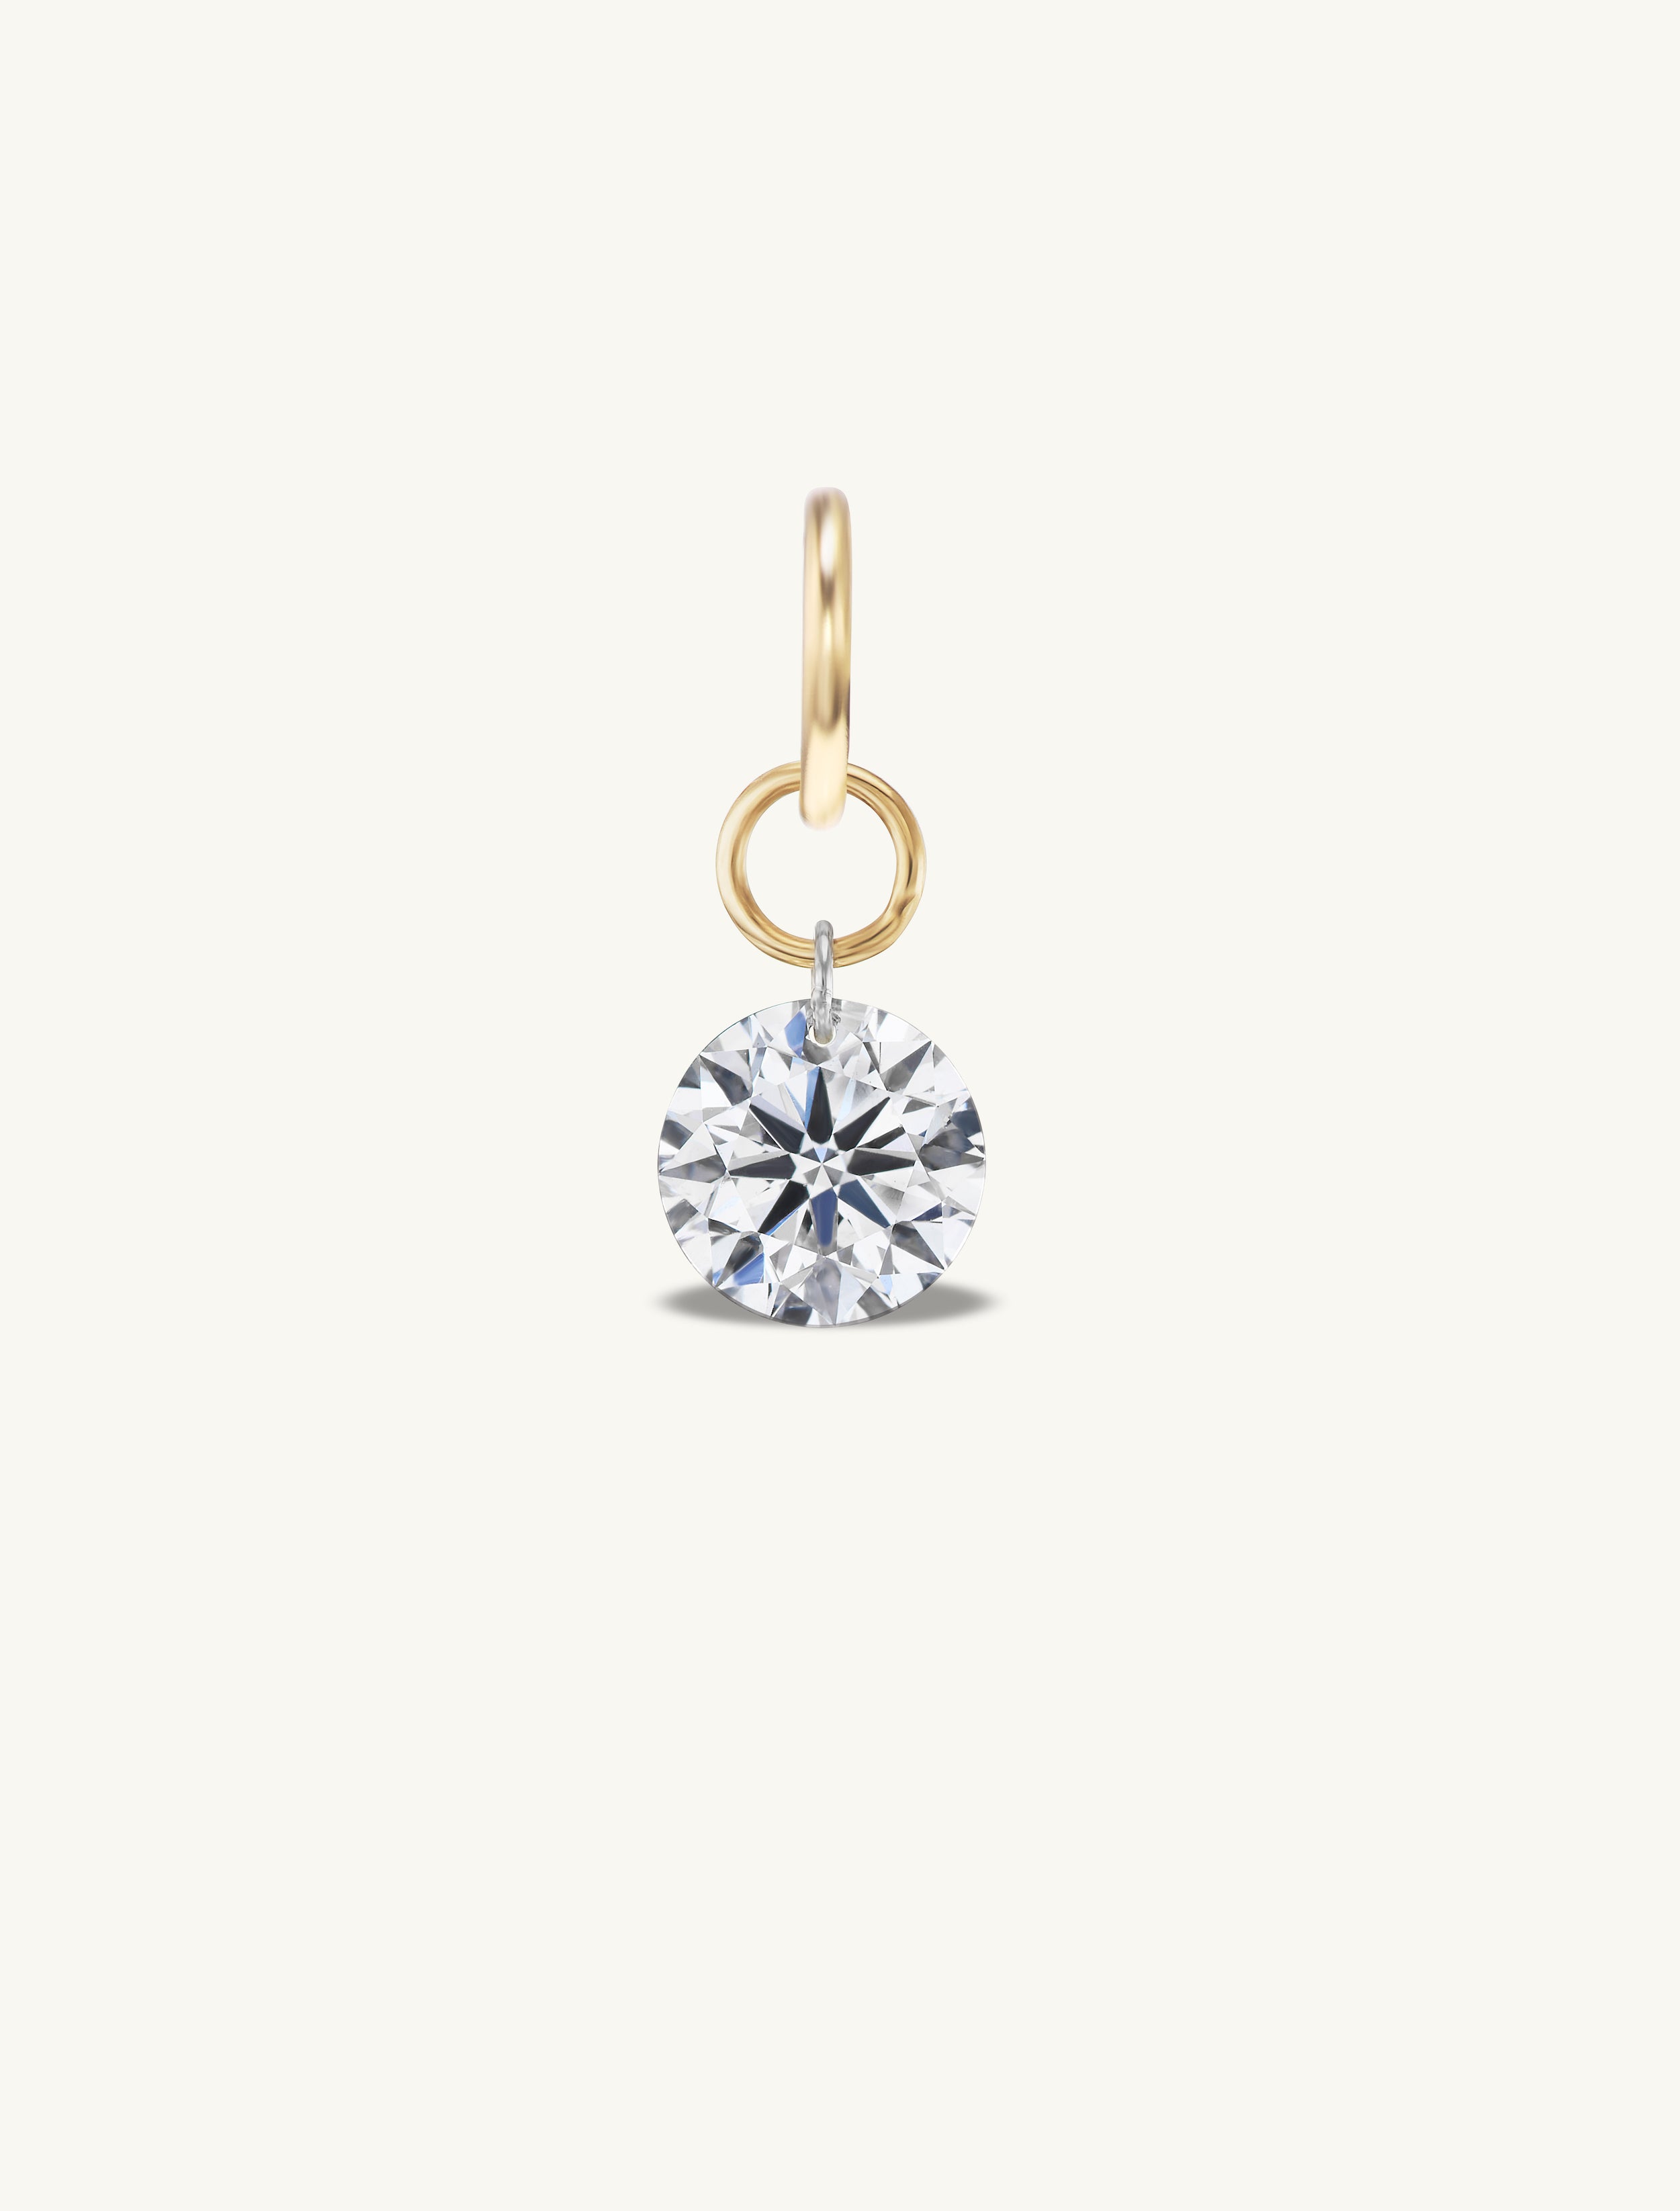 Large Round Pierced Diamond Charm for Chains